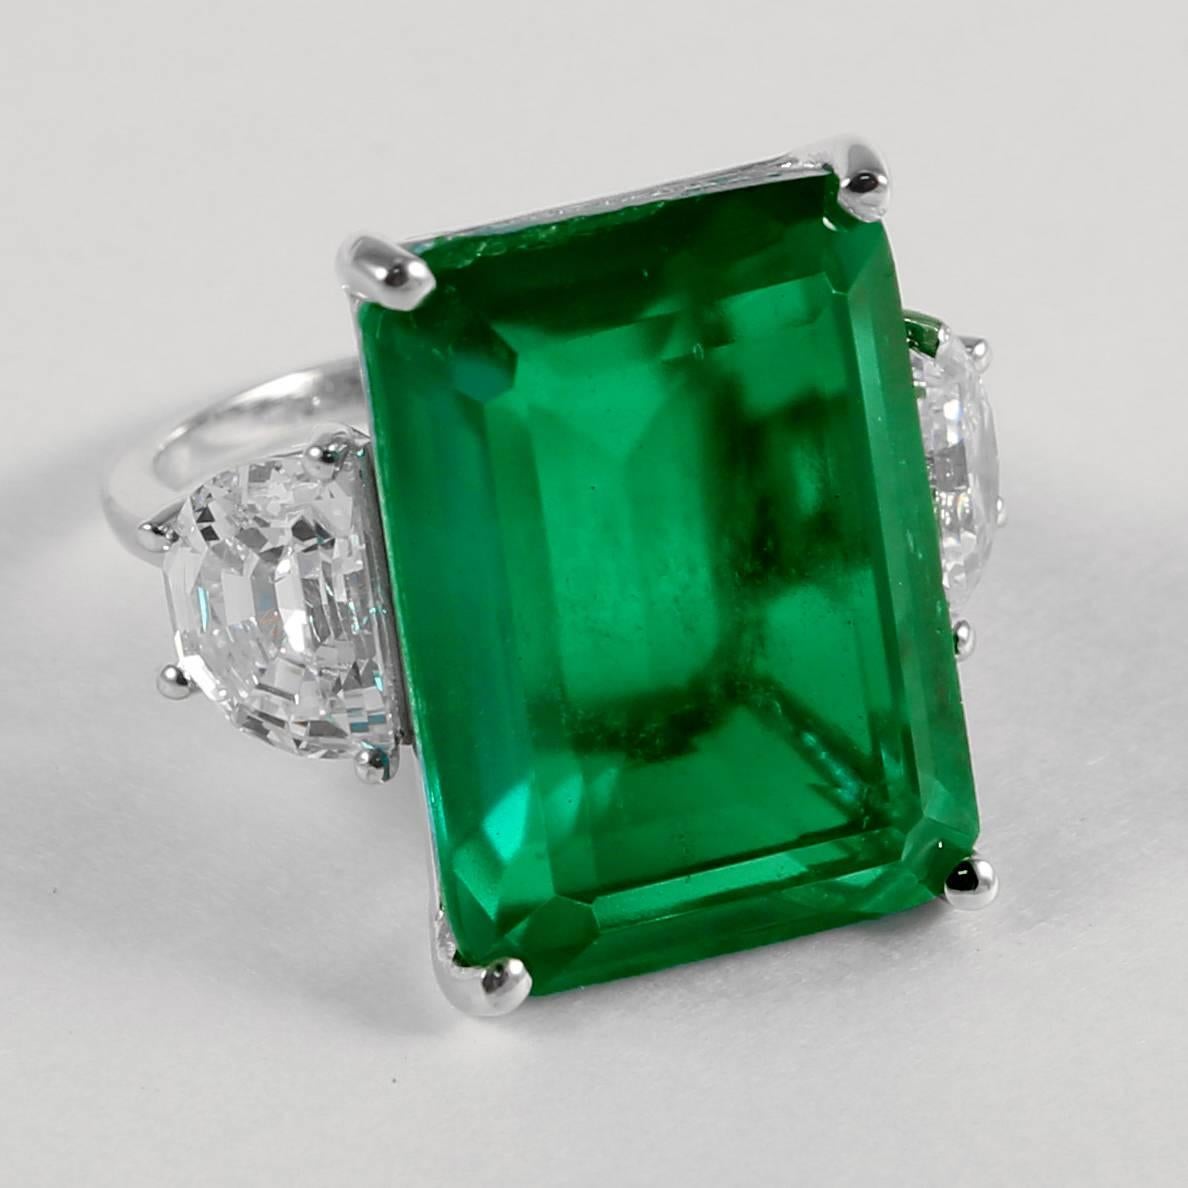 Magnificent faux 20 carat rectangular step cut emerald made of the finest green 
natural material faux emerald set with half moons either side in white gold. This ring has an amazing warm glow. Measures 1inch long and 3/4inch wide.
Free sizing.